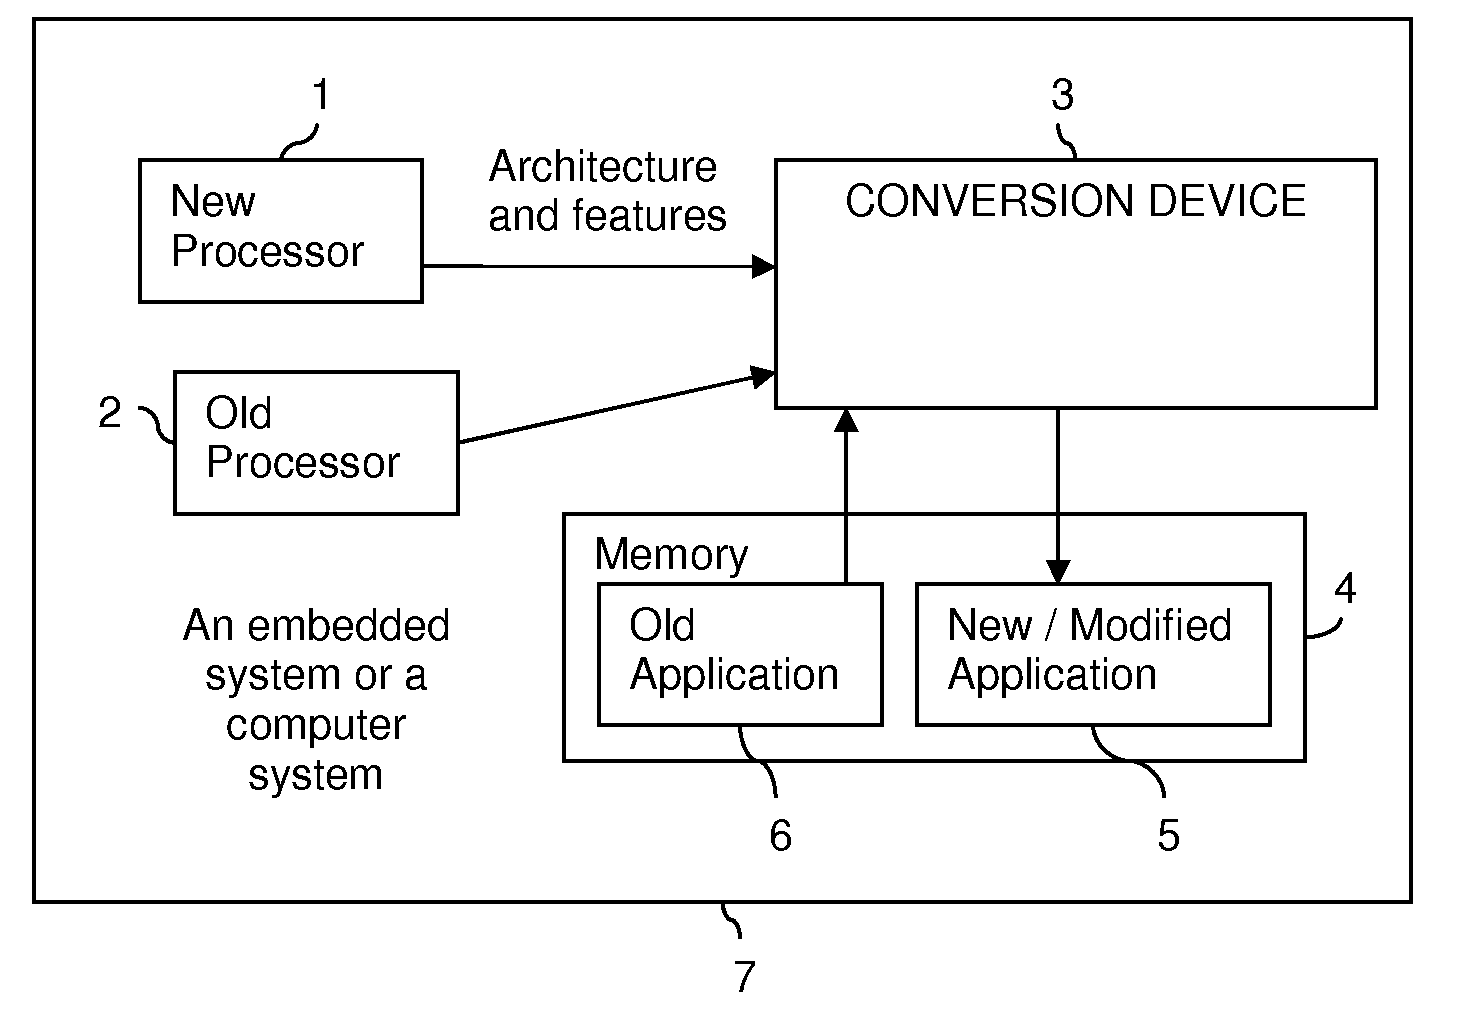 Mechanism to enable plug-and-play hardware components for semi-automatic software migration